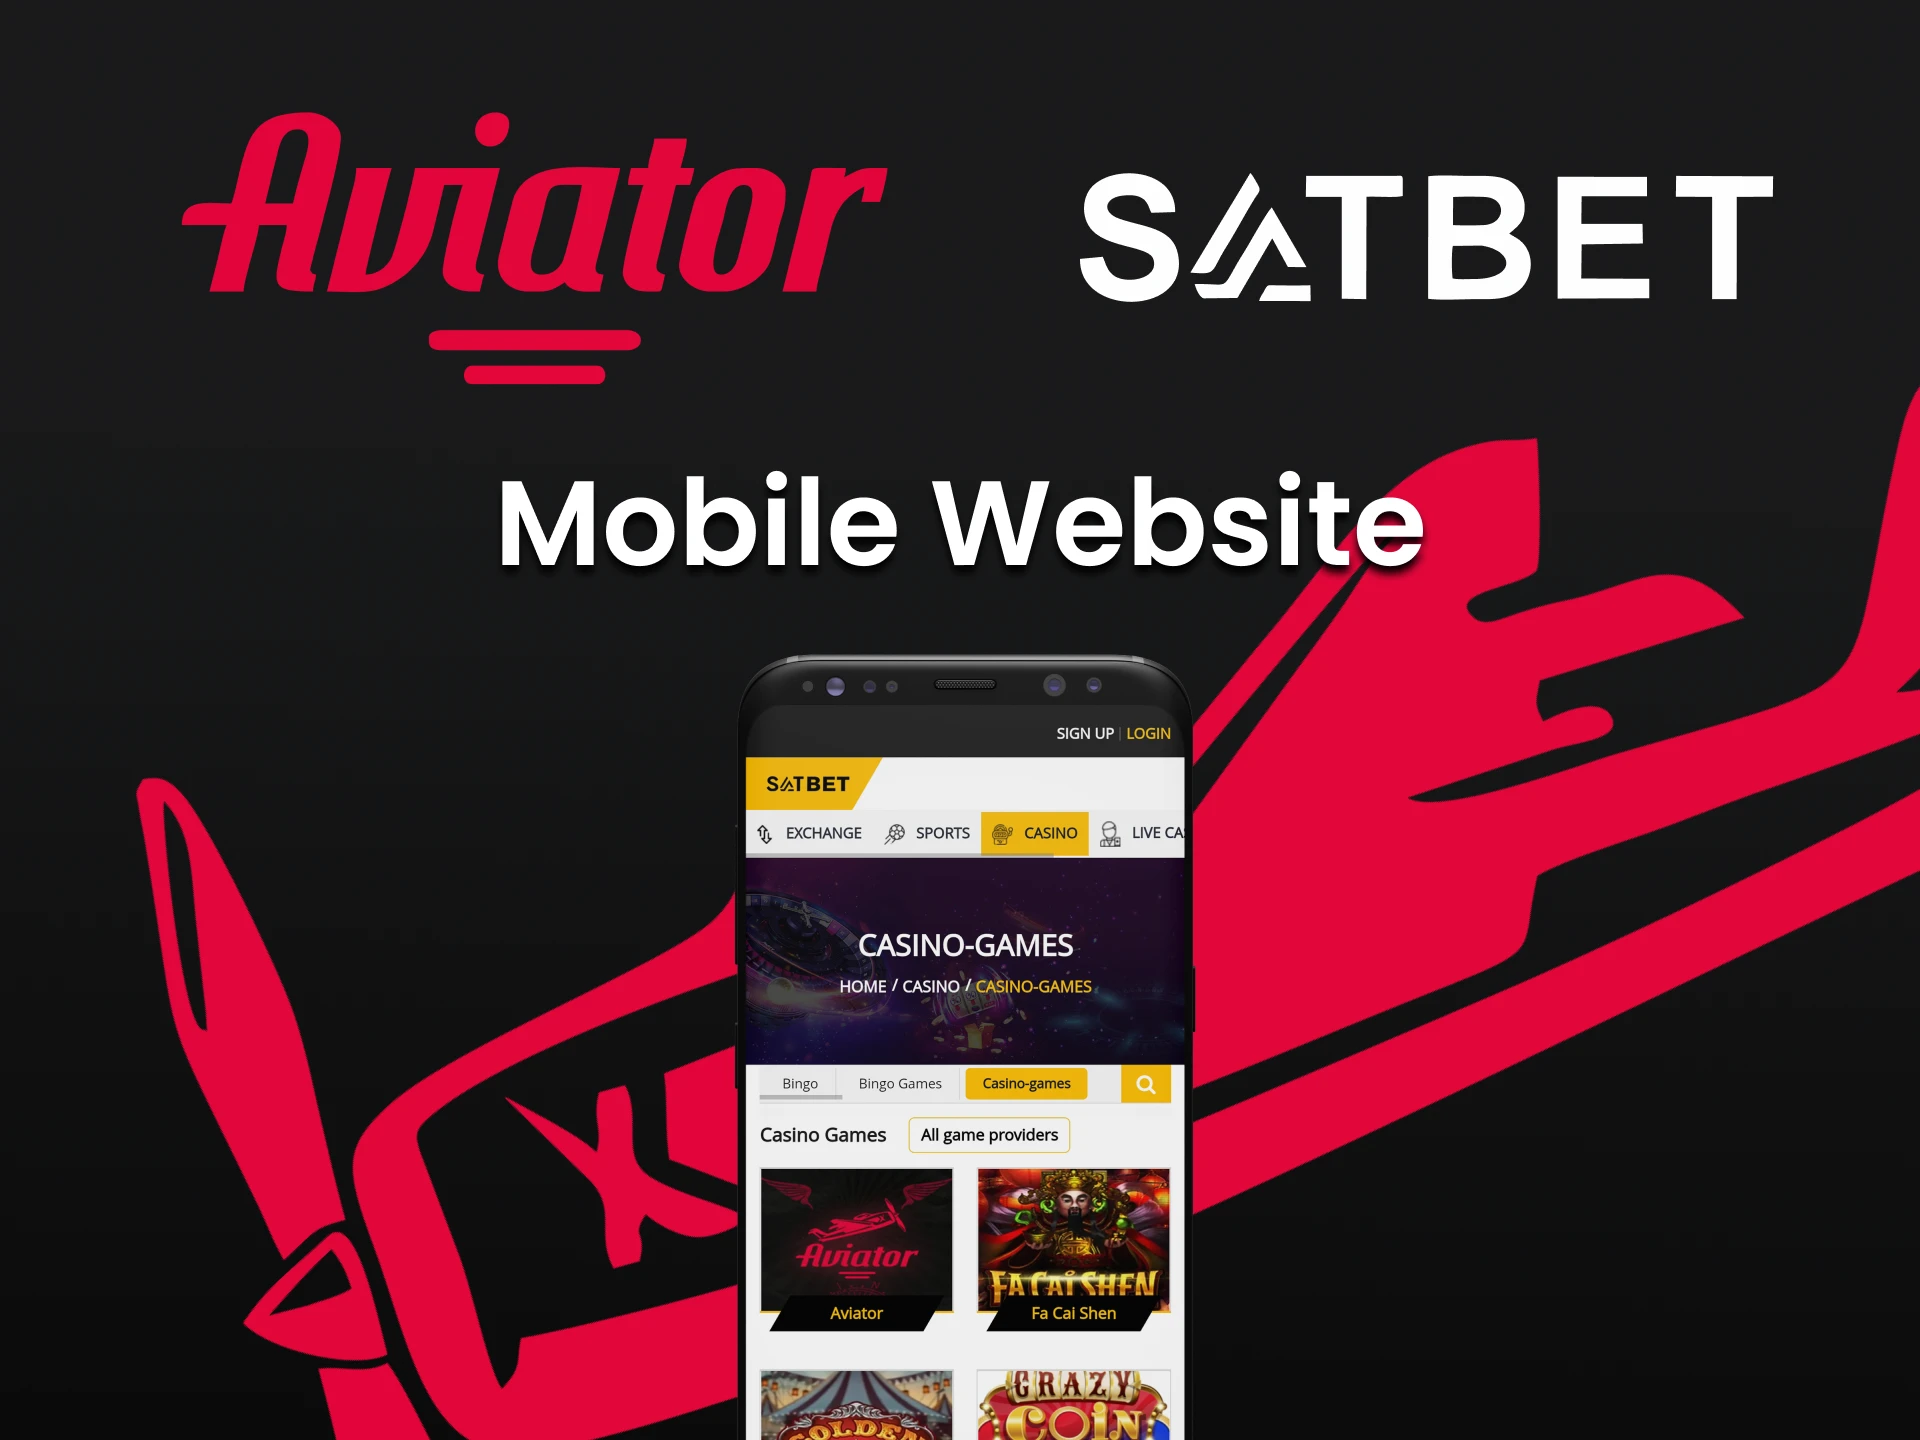 Visit the mobile version of the Satbet website to play Aviator.